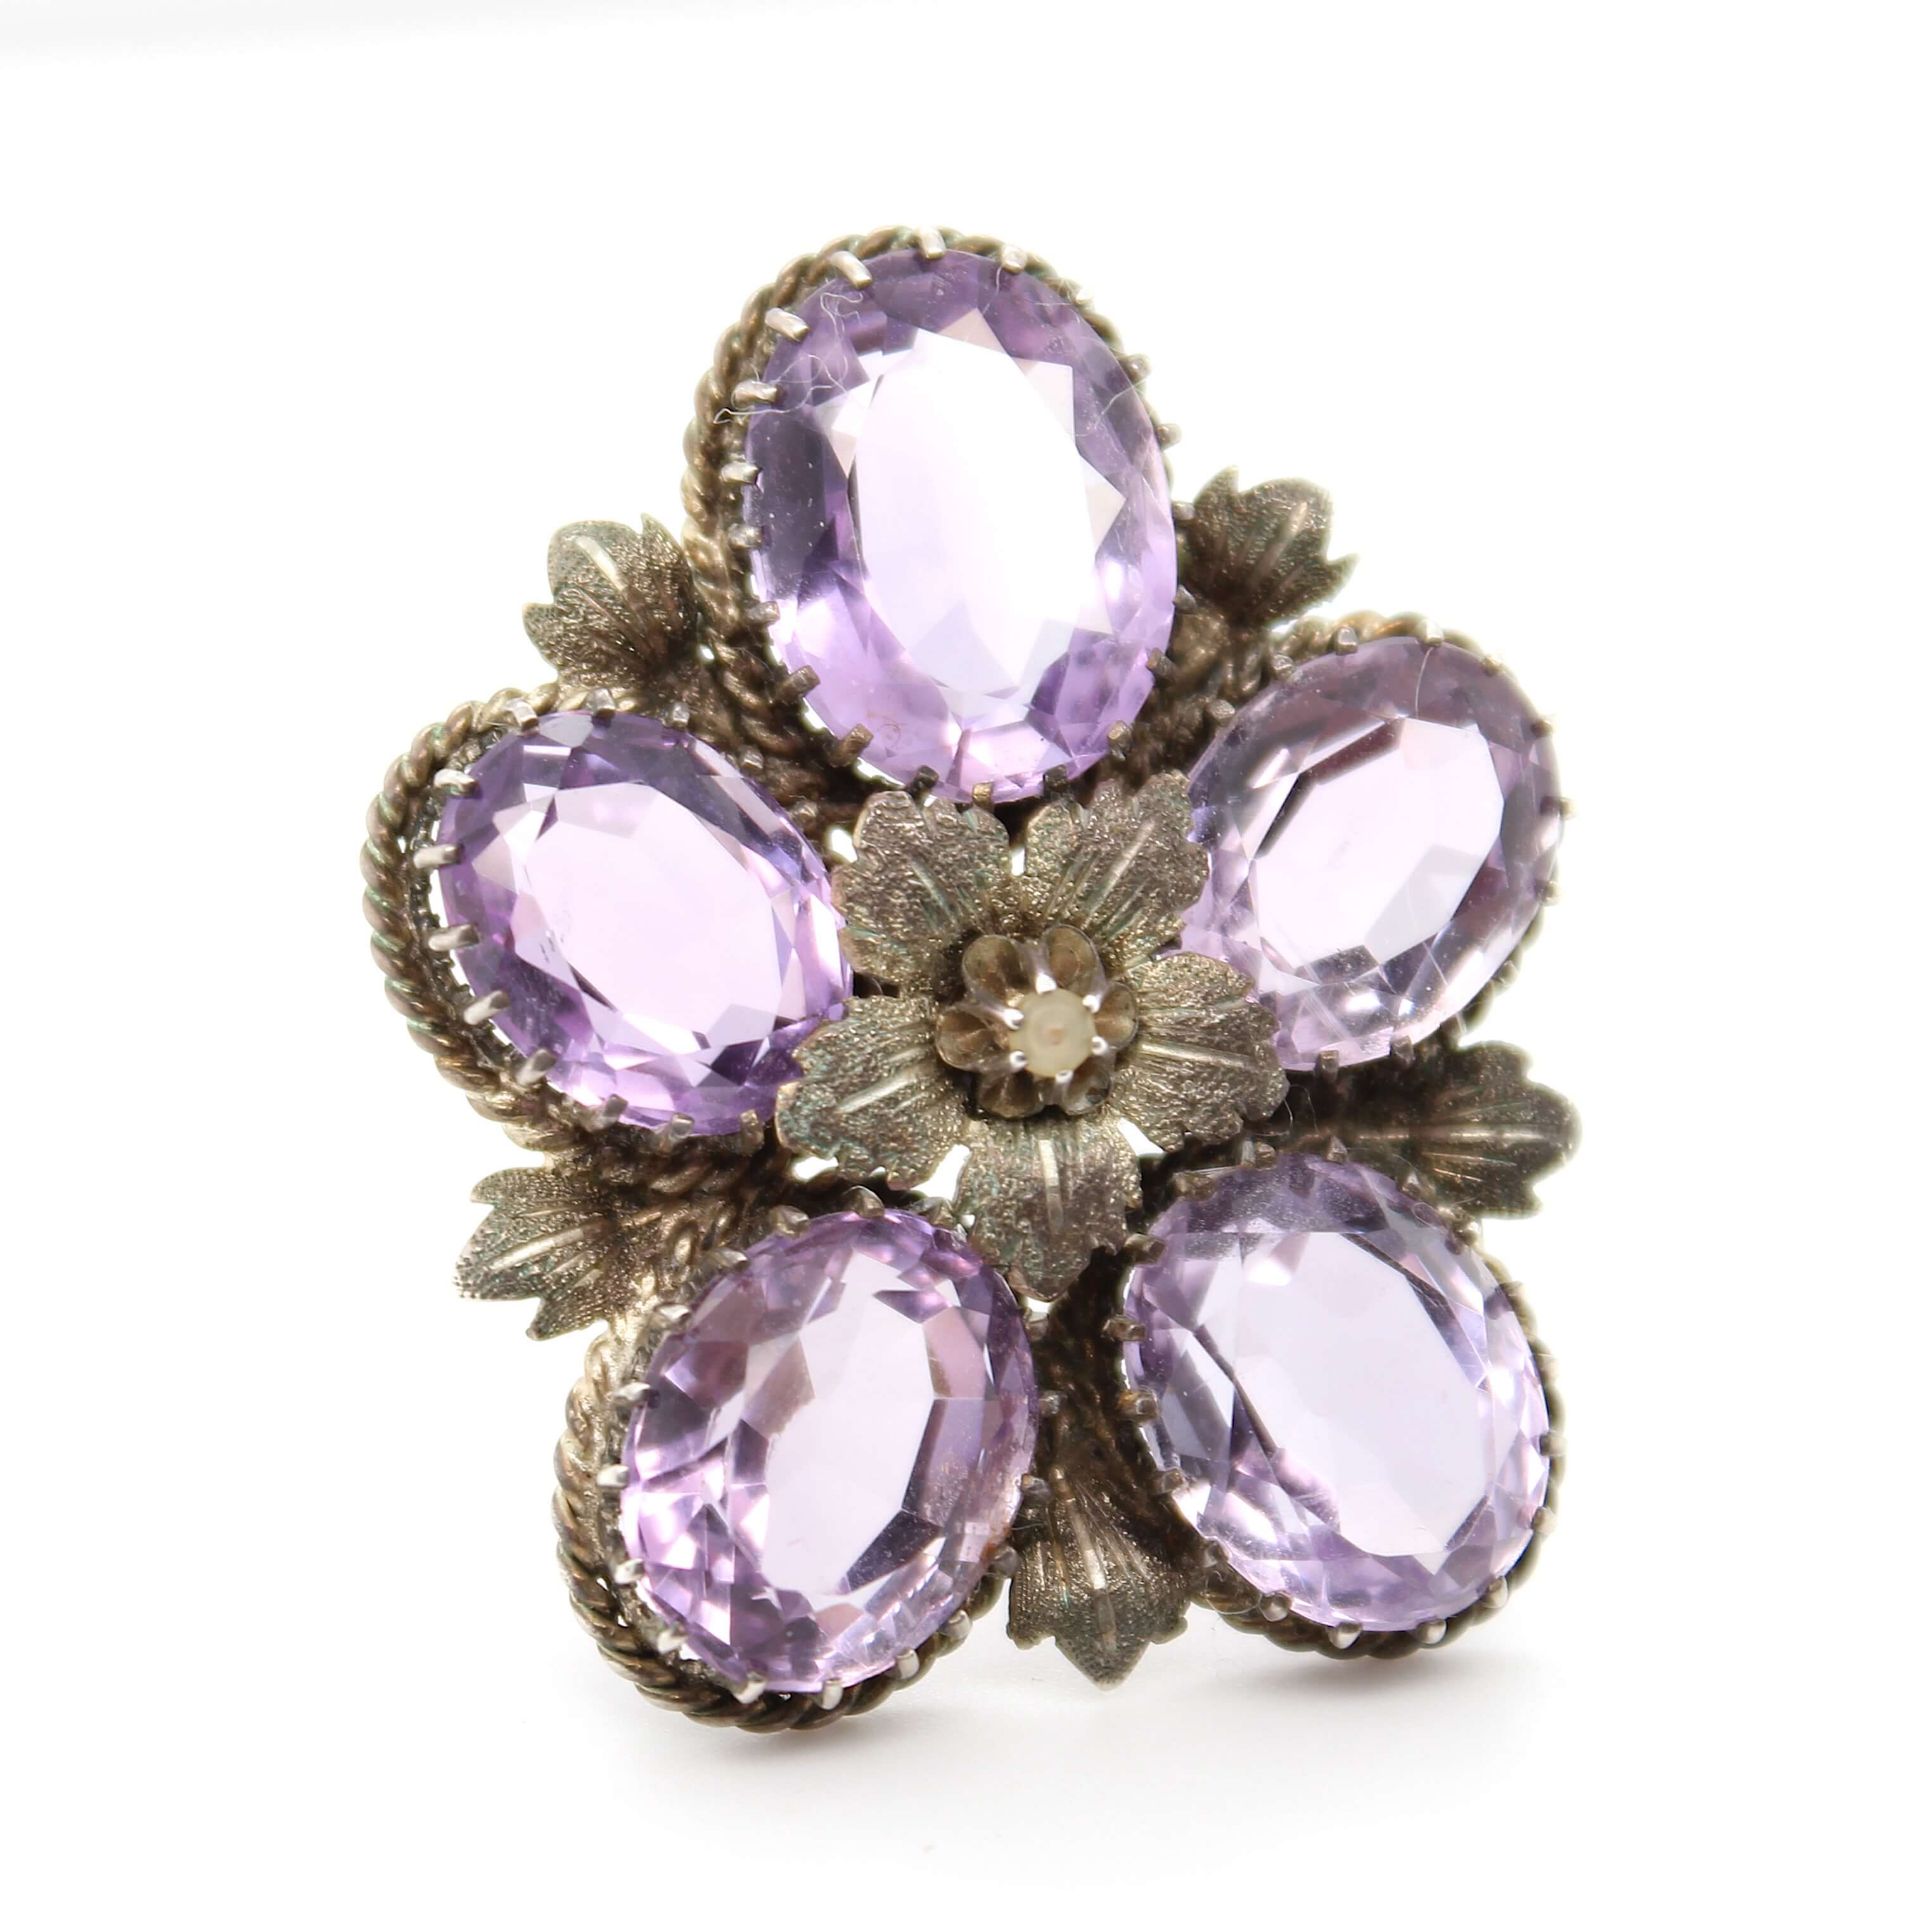 Silver brooch around 1900 with amethysts - Image 3 of 4